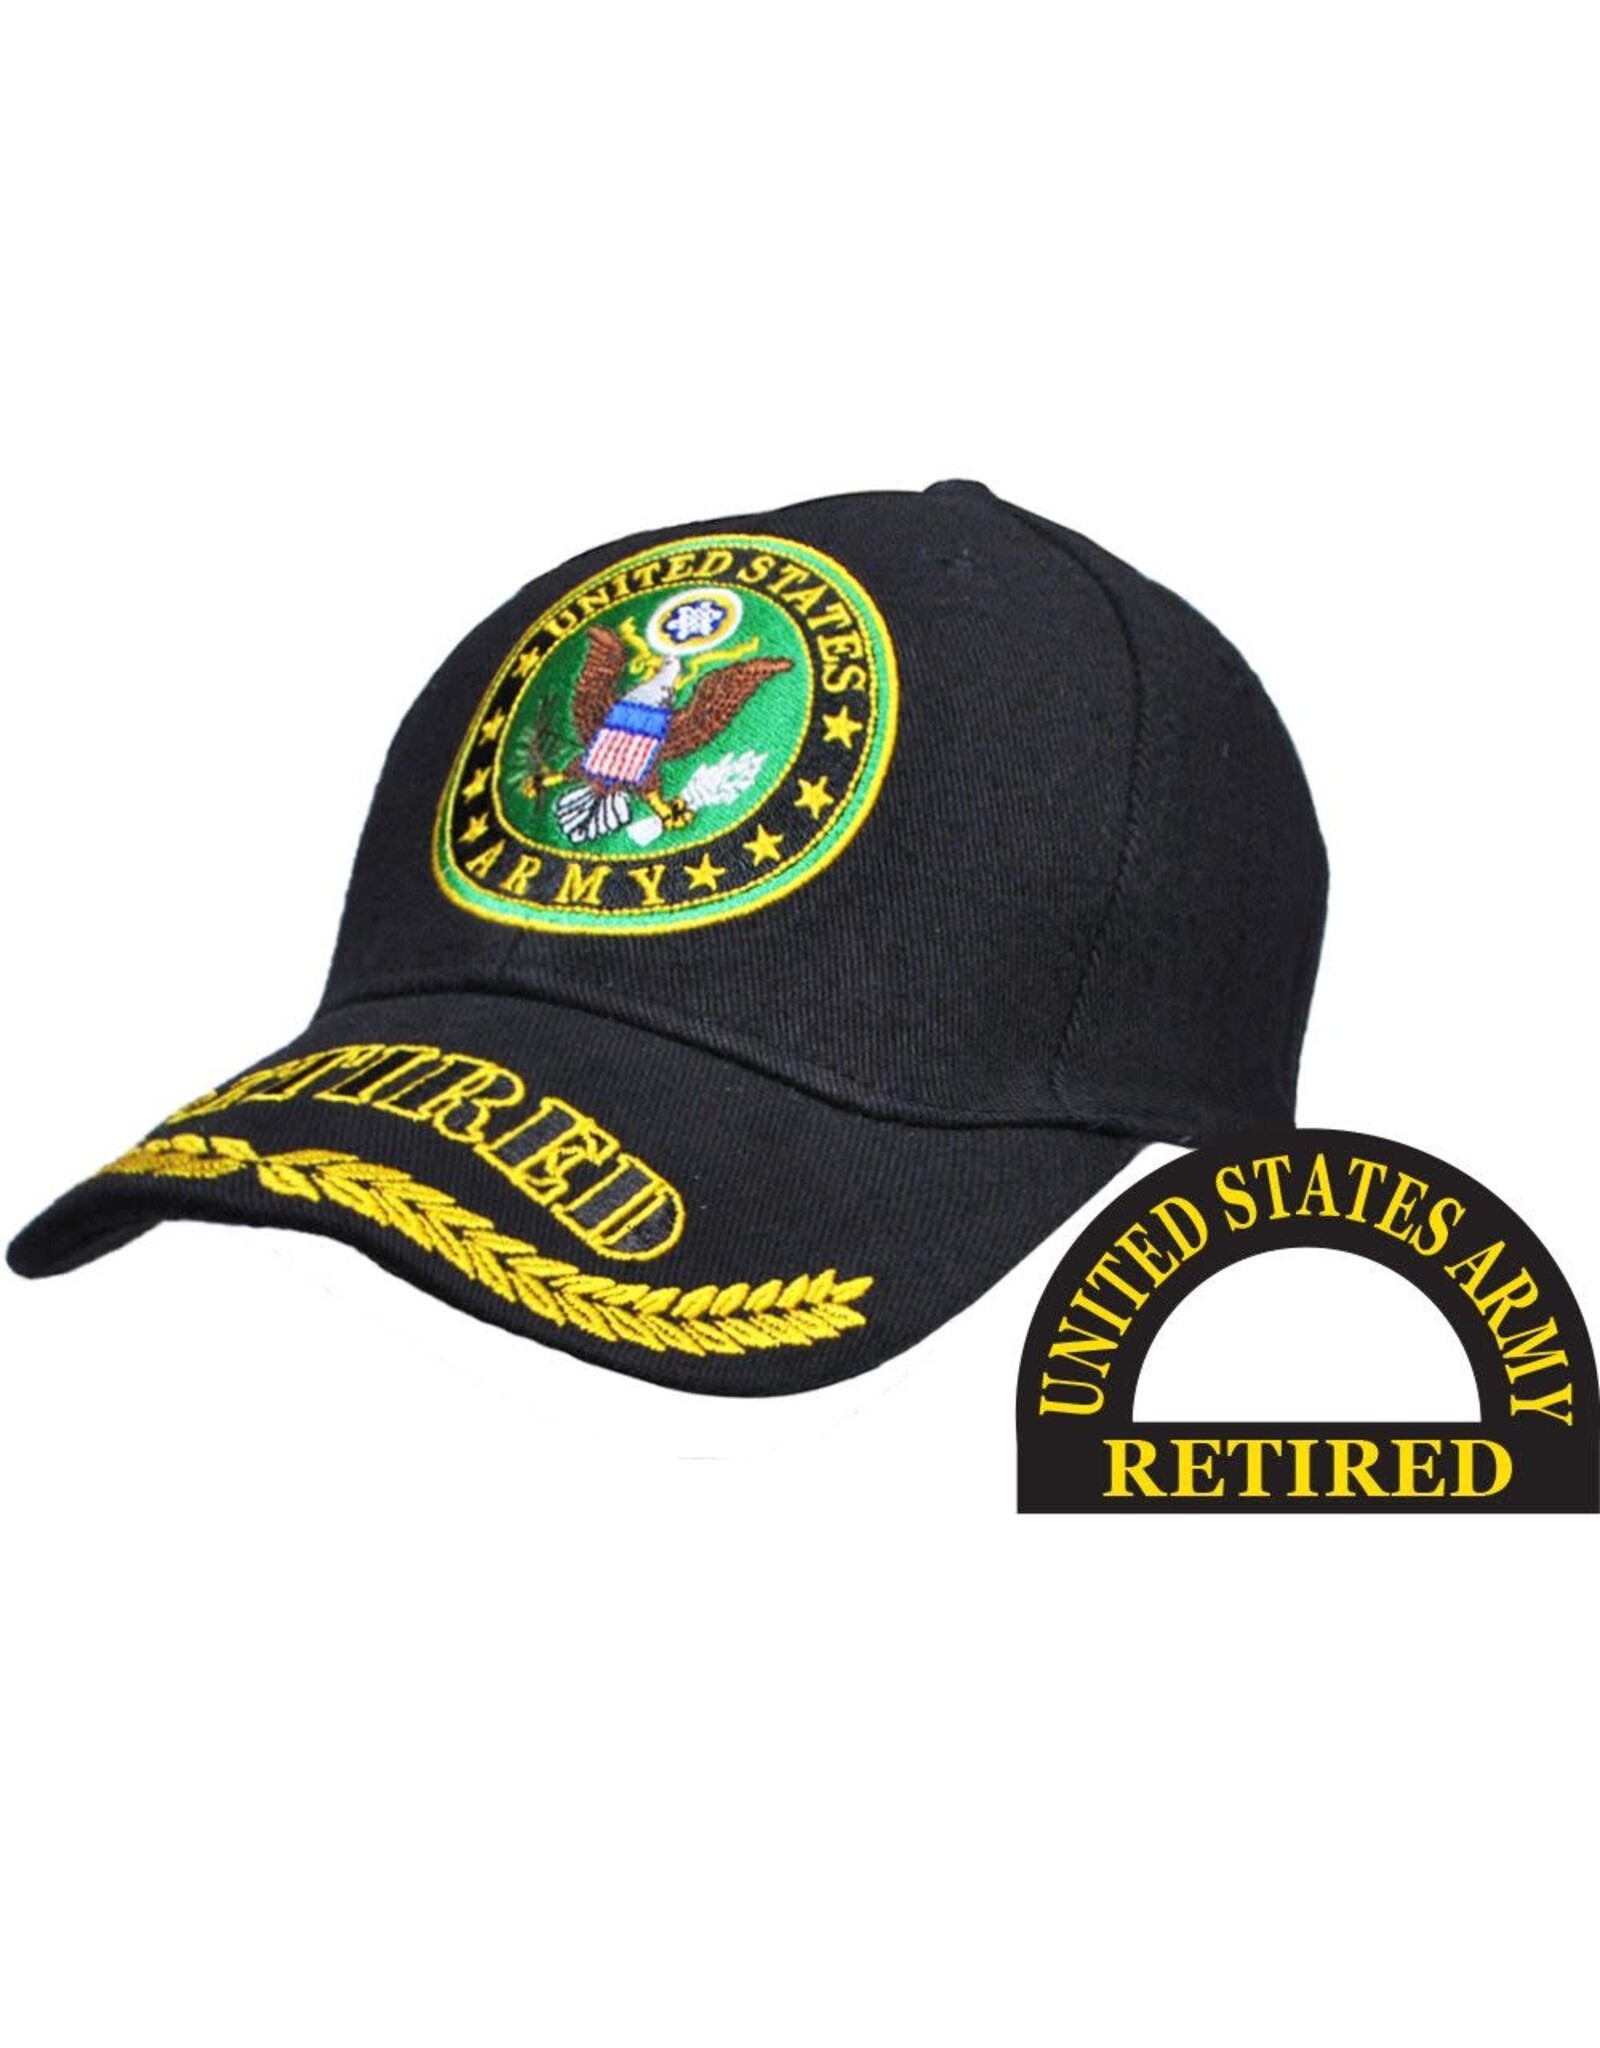 Embroidered Cap - Army Retired